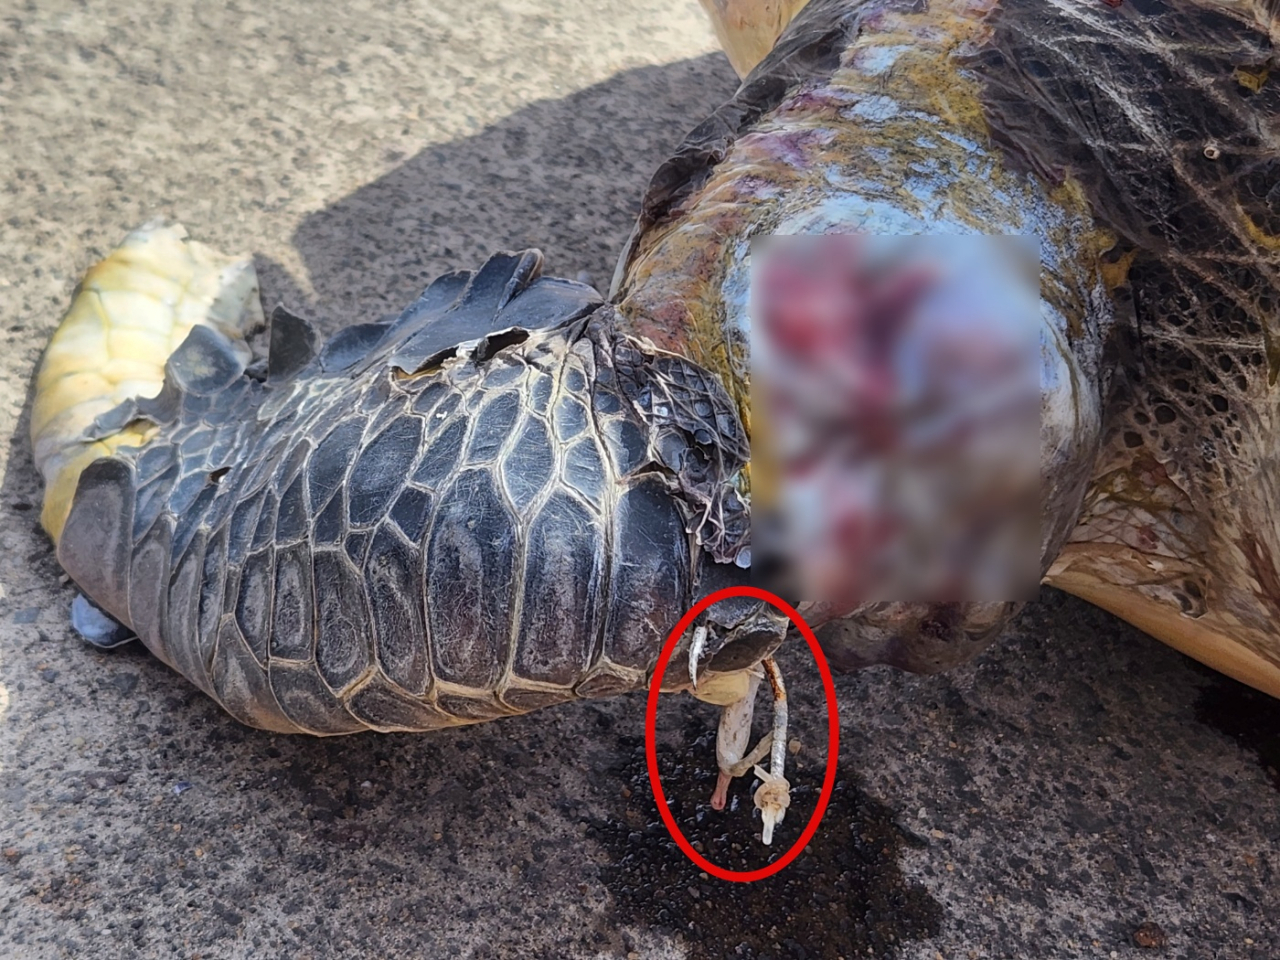 A green sea turtle was found dead in waters off Jeju Island on Saturday with a fishhook lodged in its front flipper. (Yonhap)